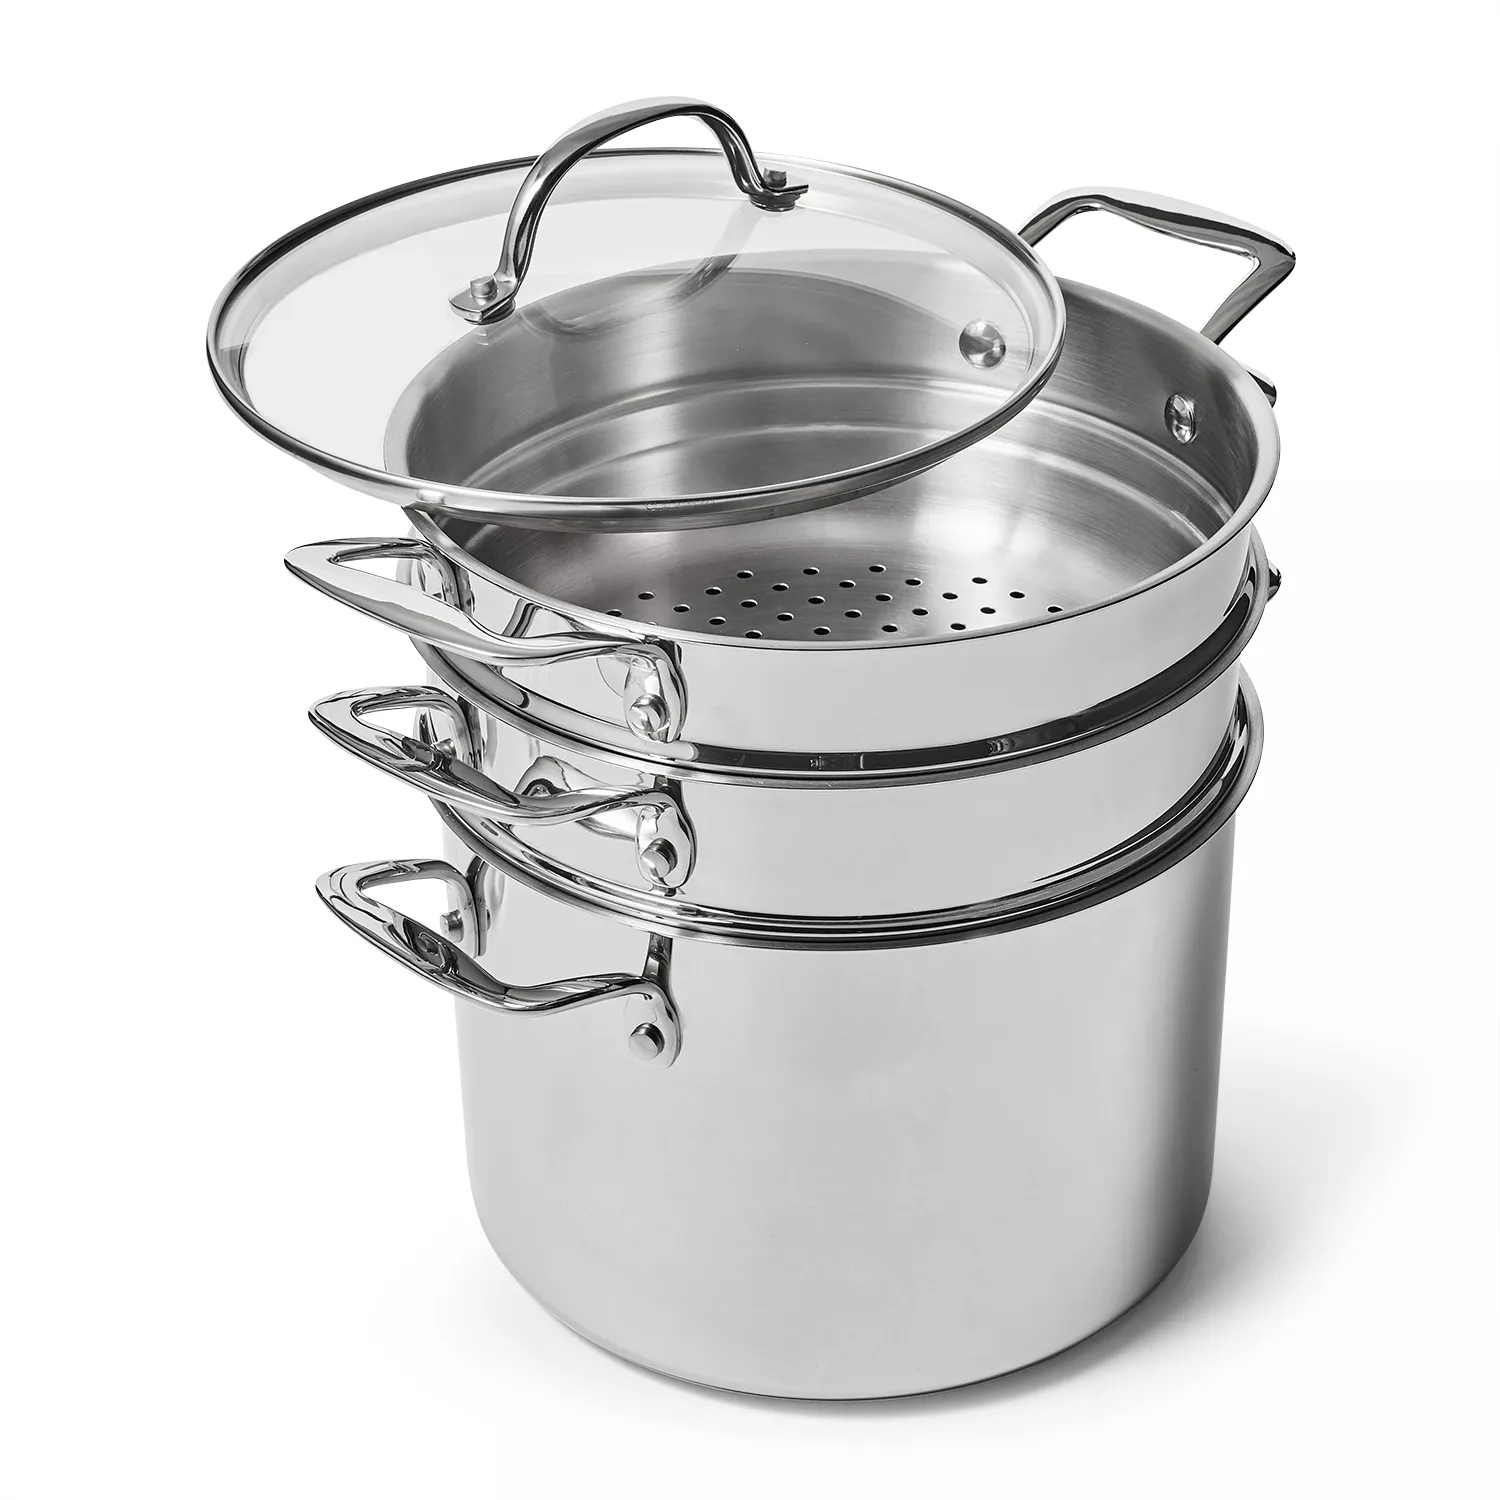 HENCKELS Pasta Pot with Lid and Strainers, 8.5-qt, Stainless Steel